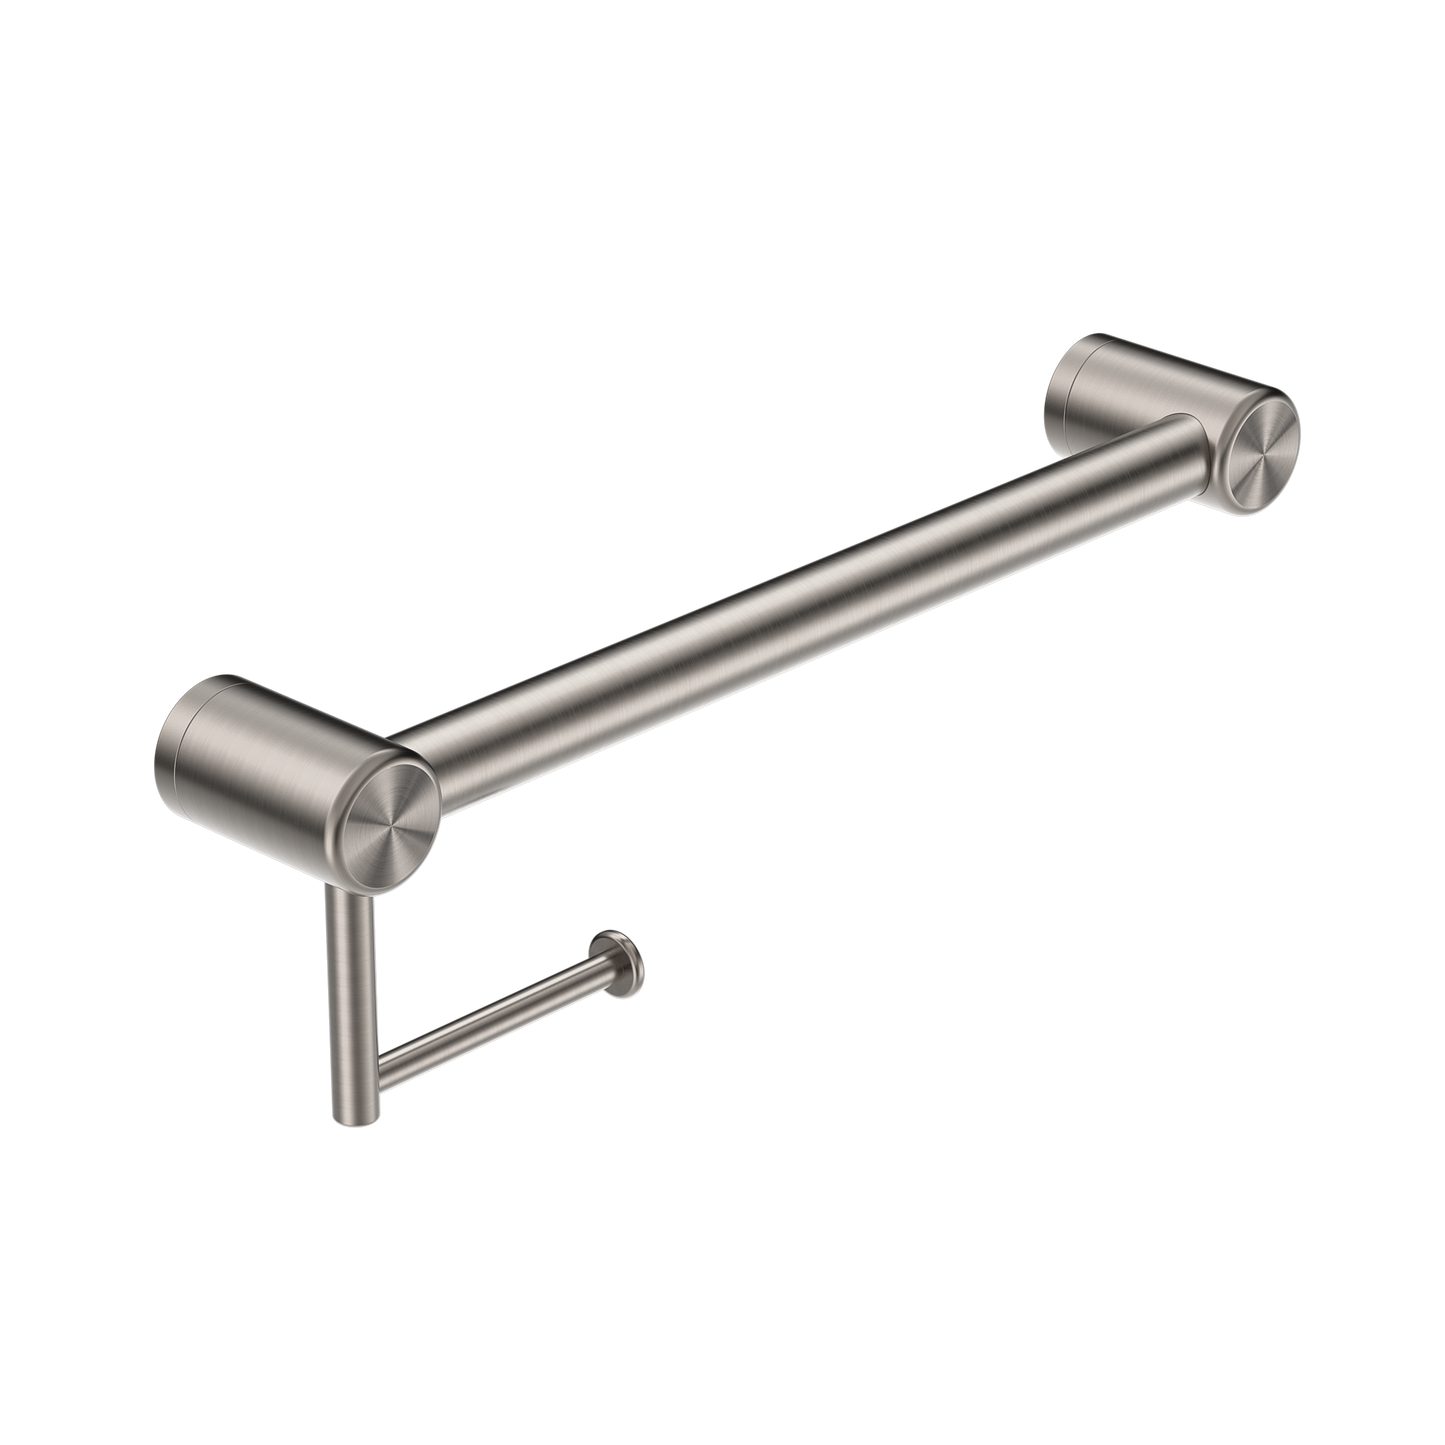 Calibre Mecca 32mm Grab Rail With Toilet Roll Holder 450mm Brushed Nickel - NRCR3218ABN